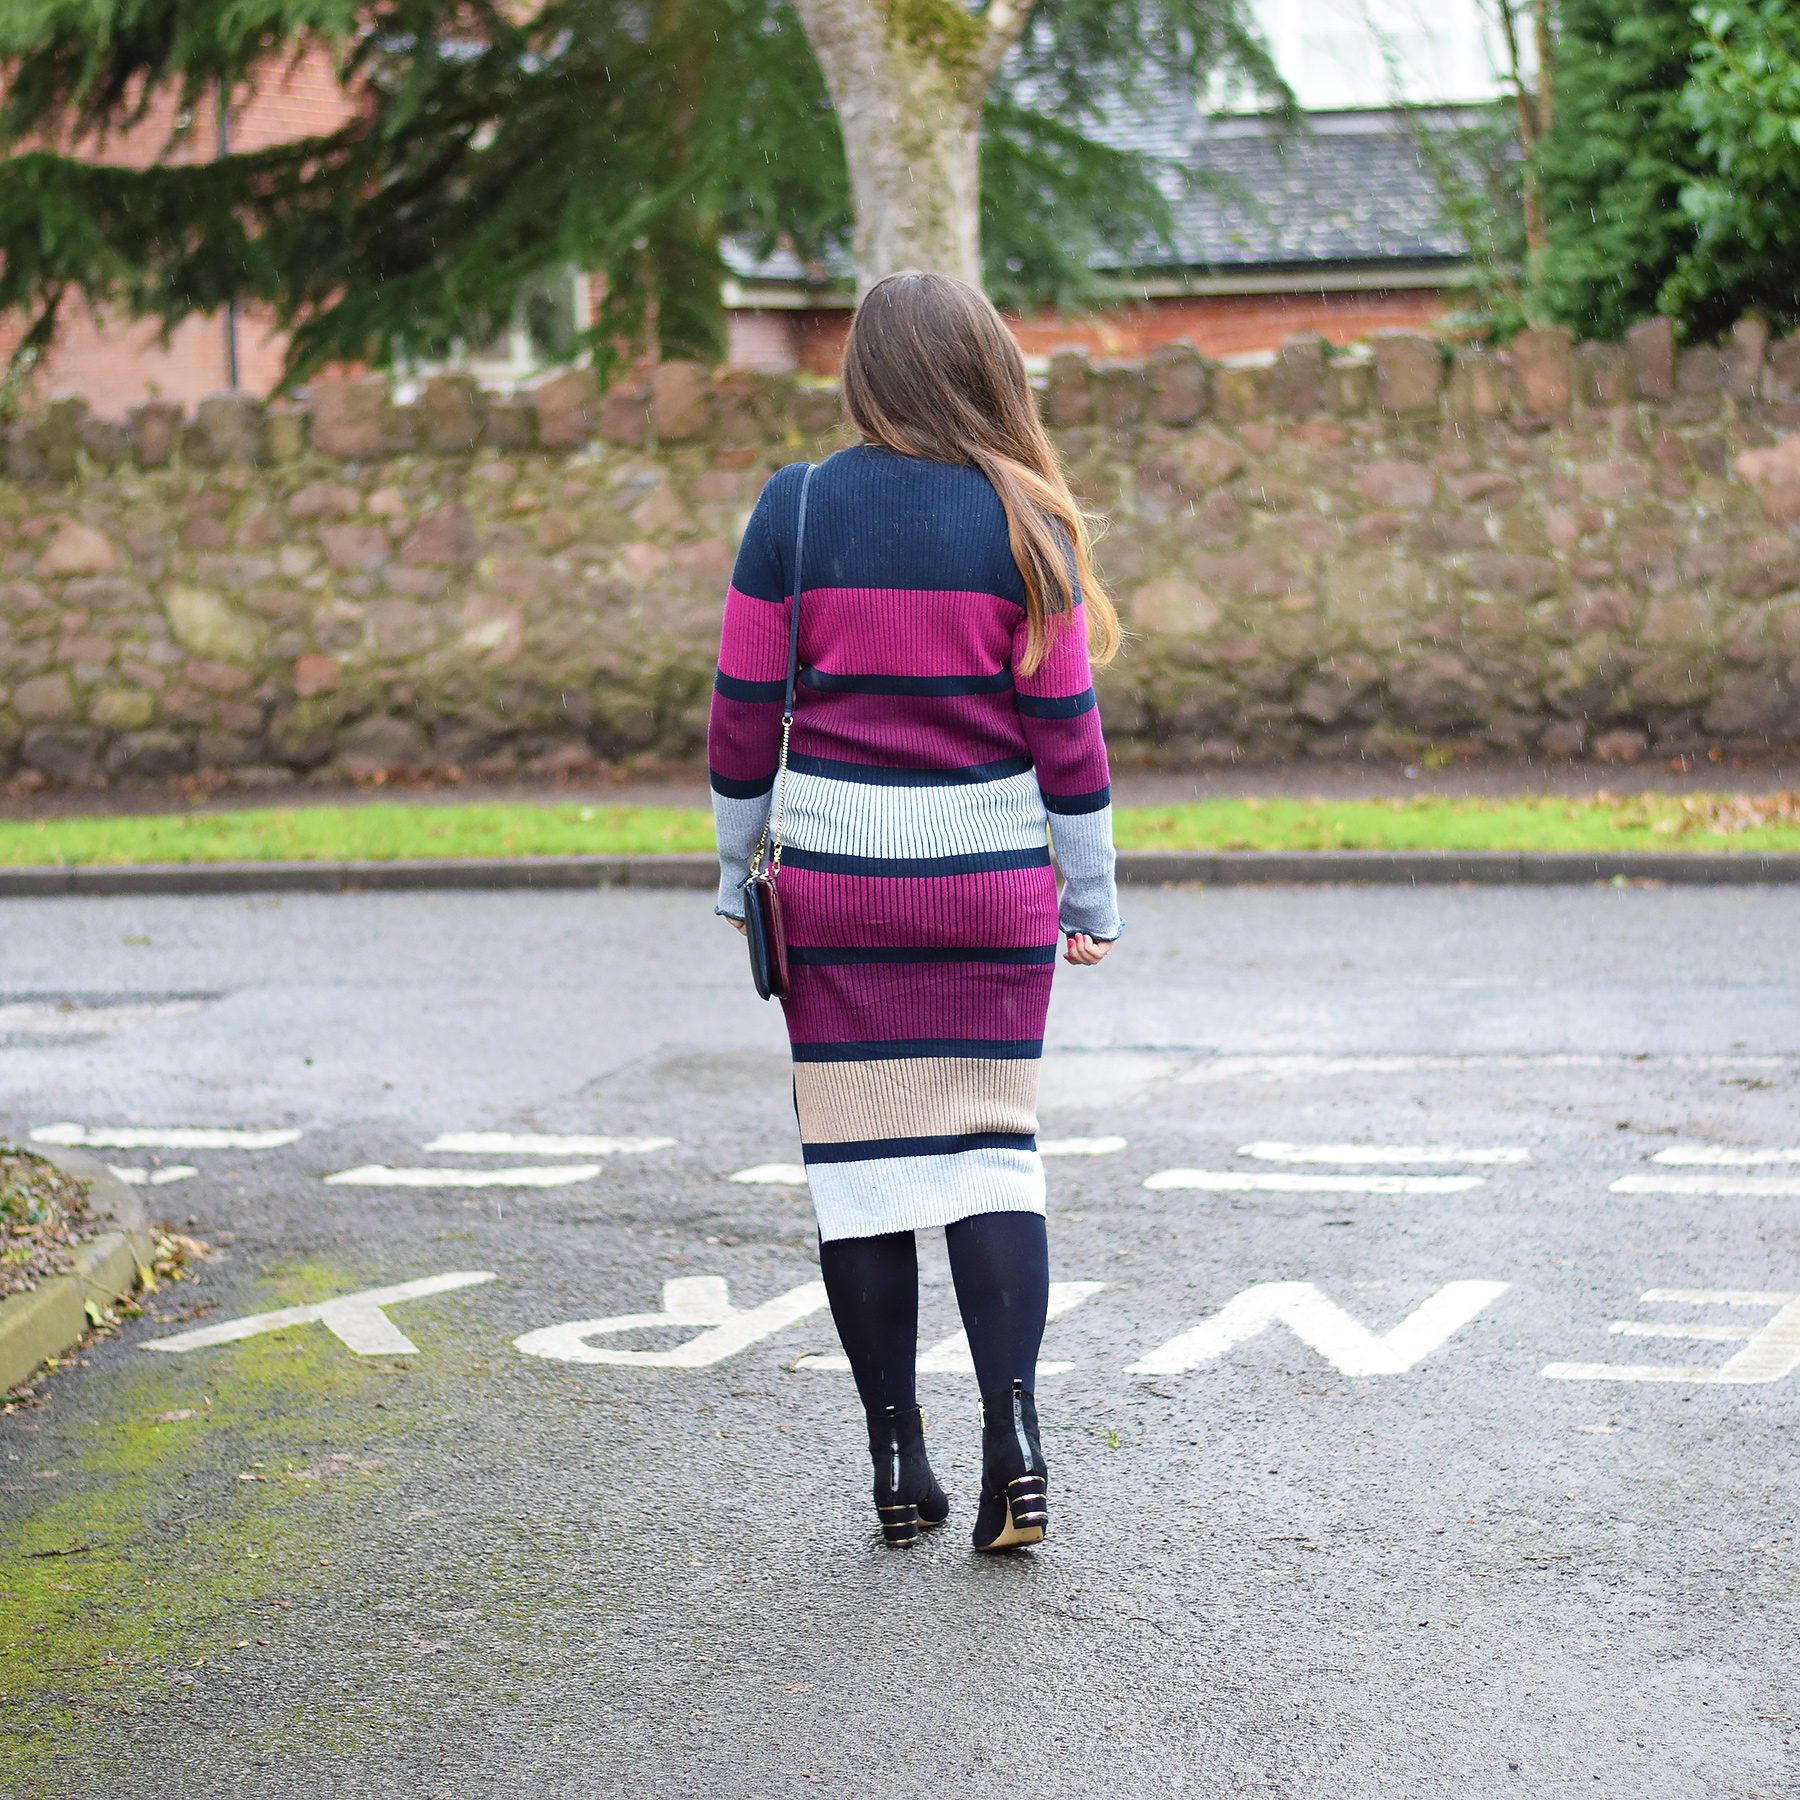 How to style a striped jumper dress